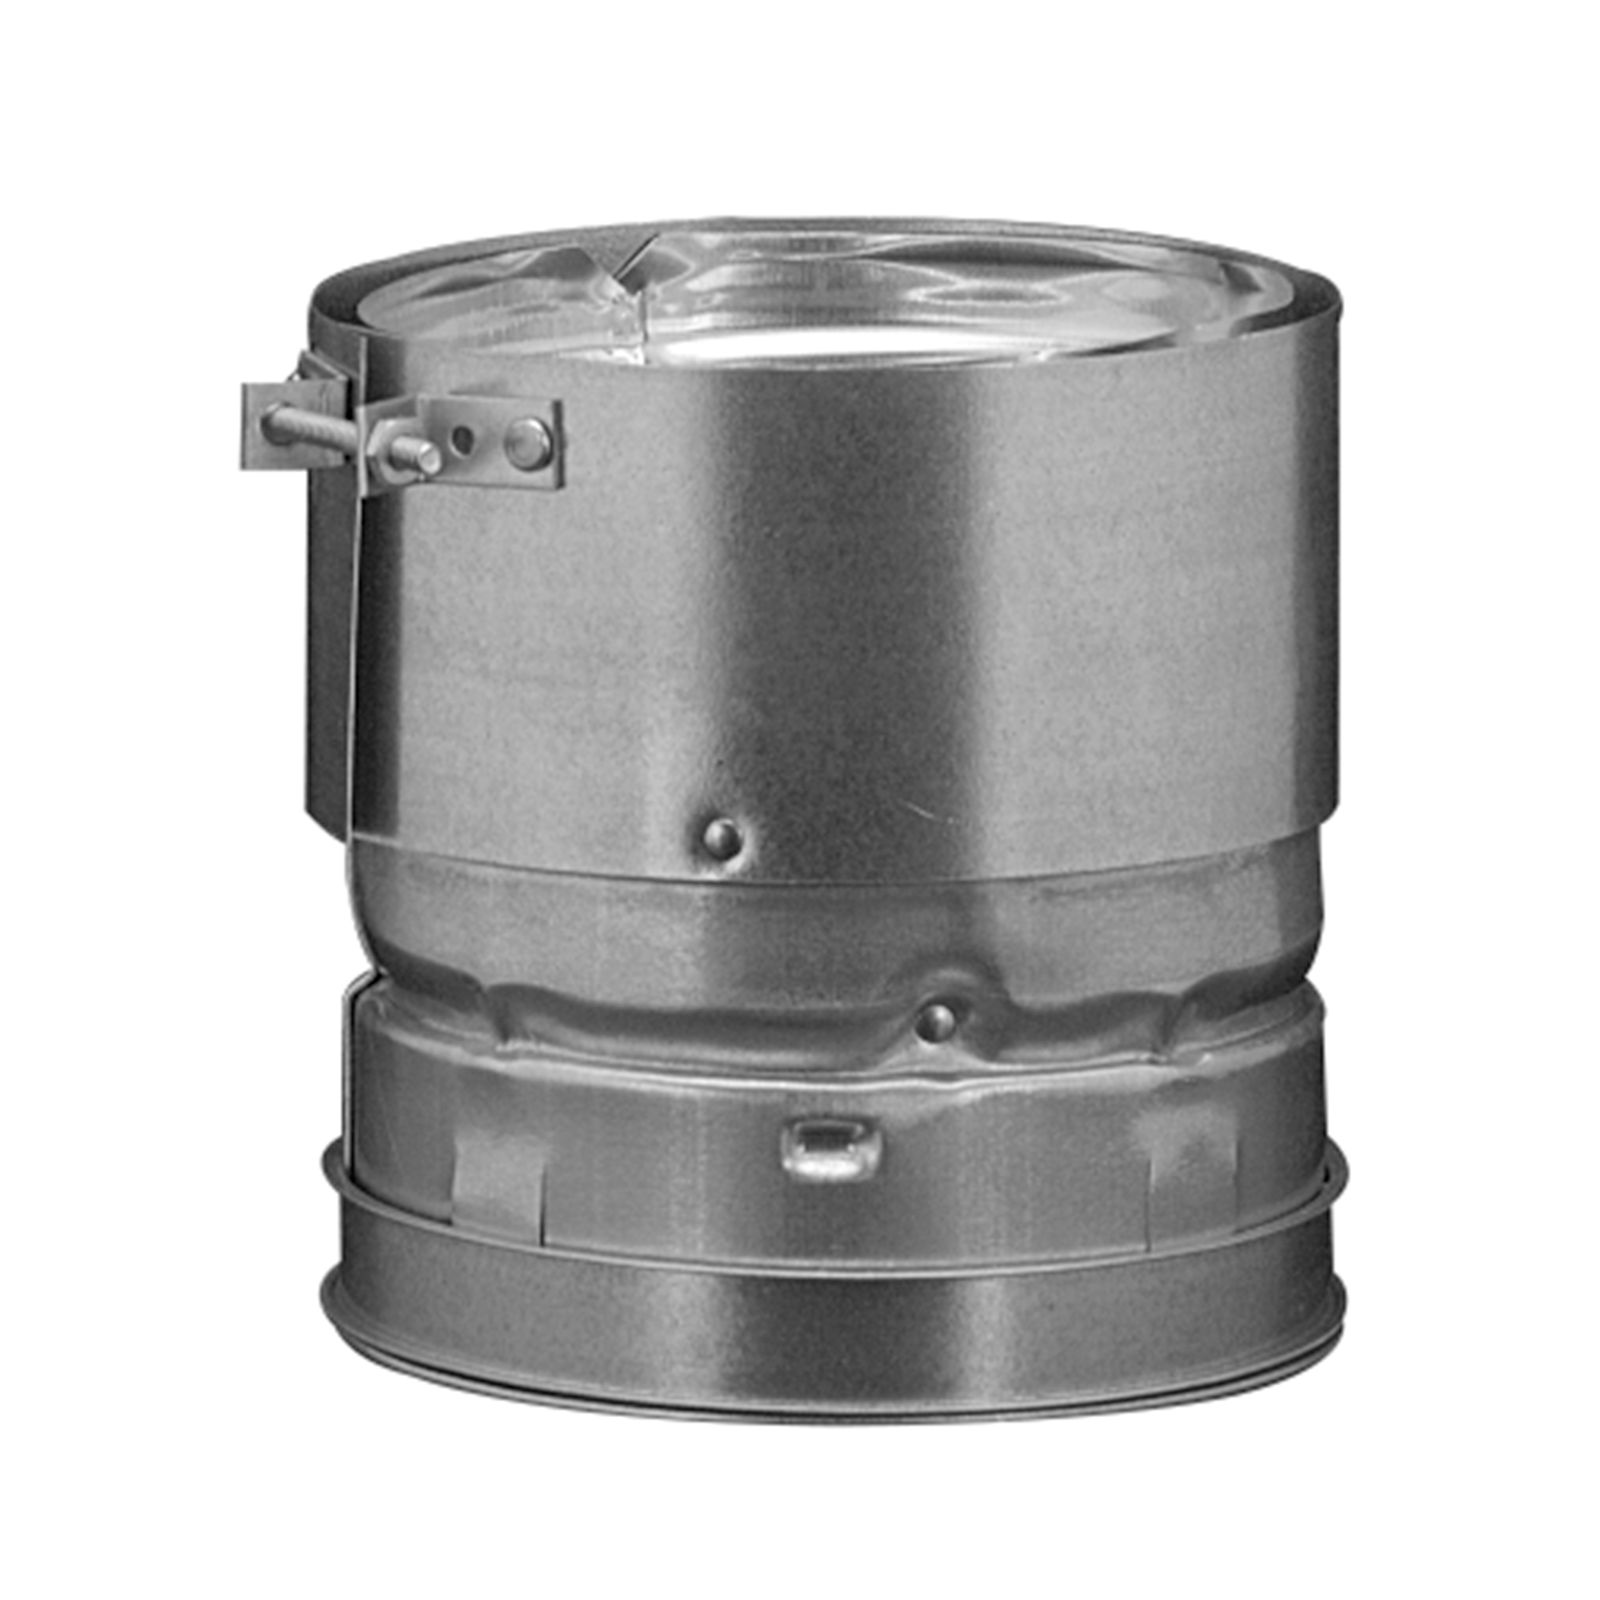 Hart & Cooley 018998 - B-Vent Round Female Adapter, 5"